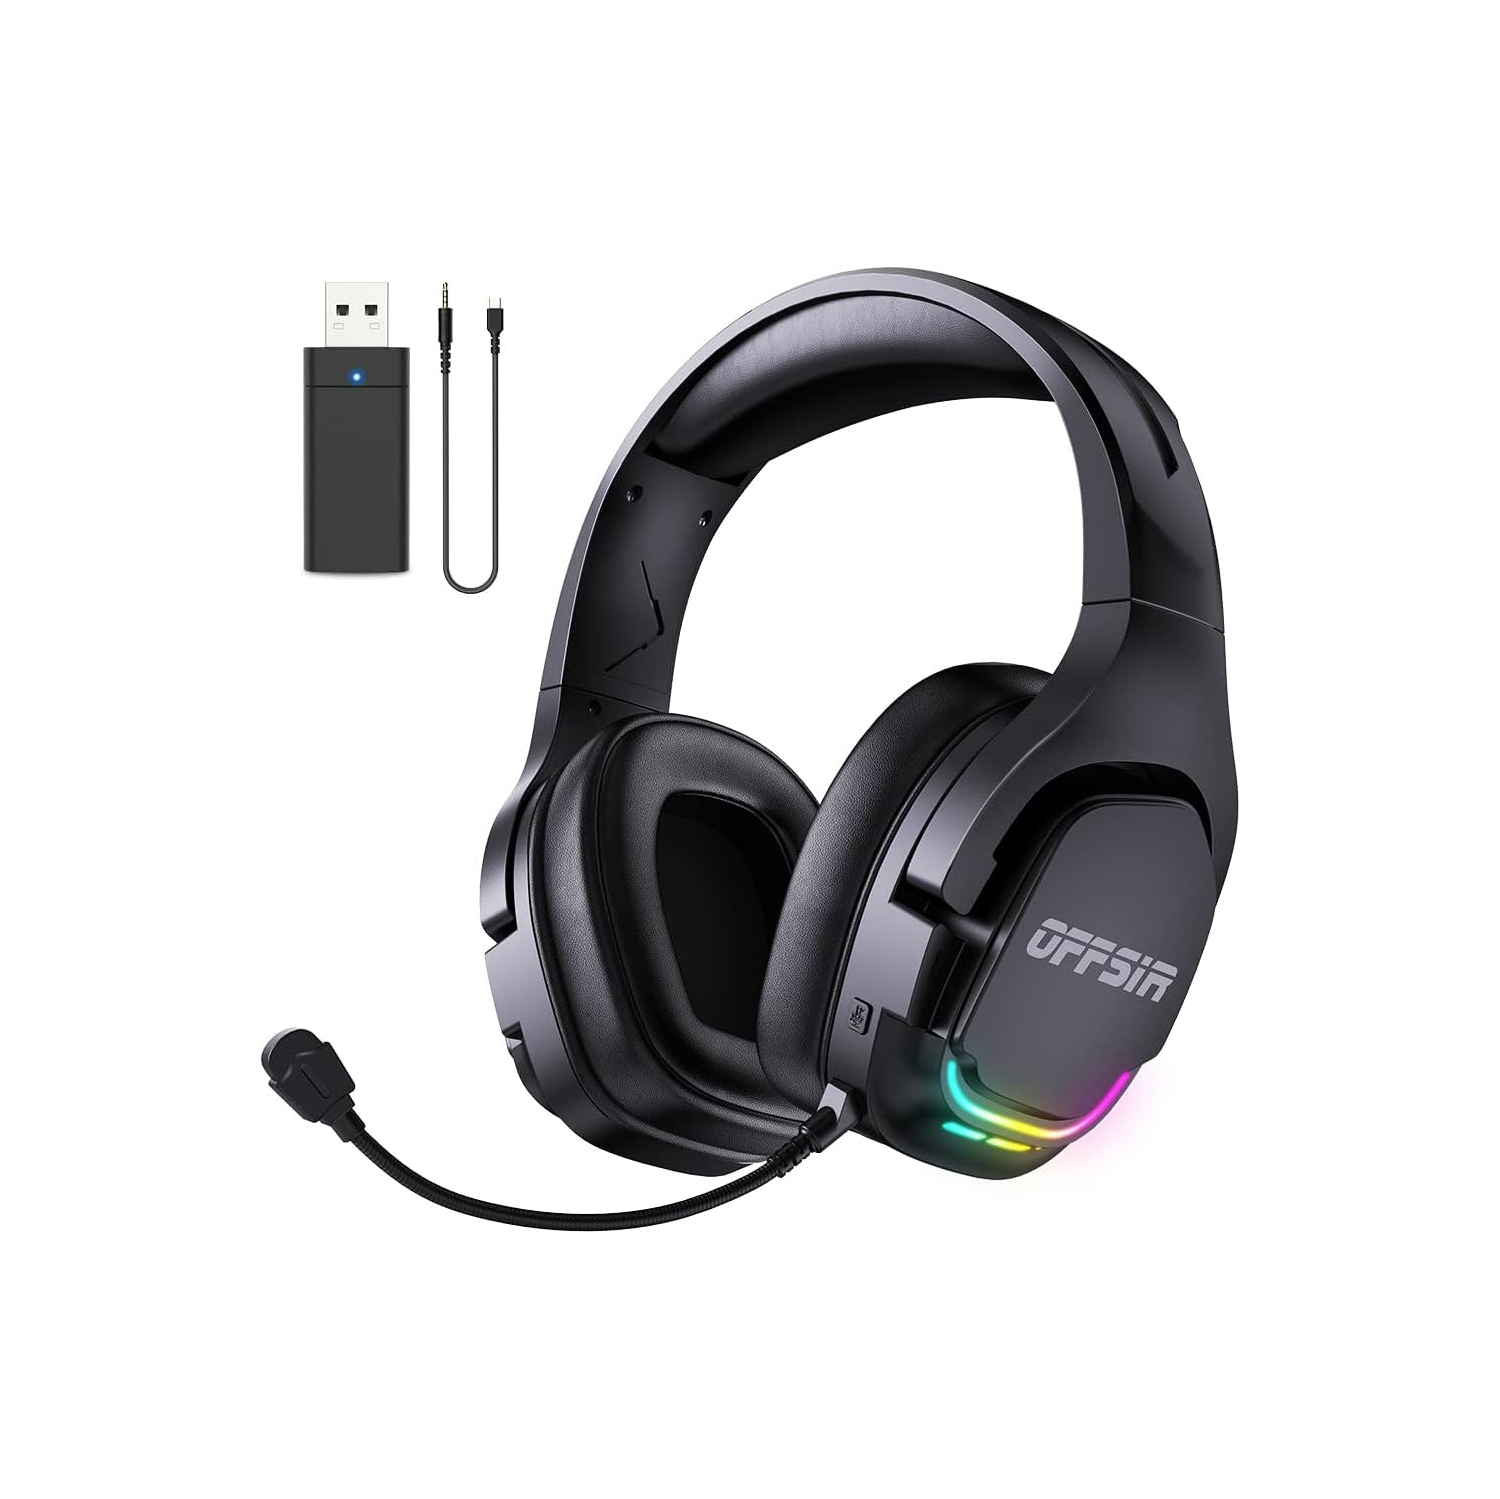 3-In-1 Gamer Headphones with Microphone for PC PS5 PS4. RGB Lights, 2.4G Wireless/Bluetooth/3.5mm Wired Connection. Compatible with Xbox, Playstation, Mac, Computer, Laptop